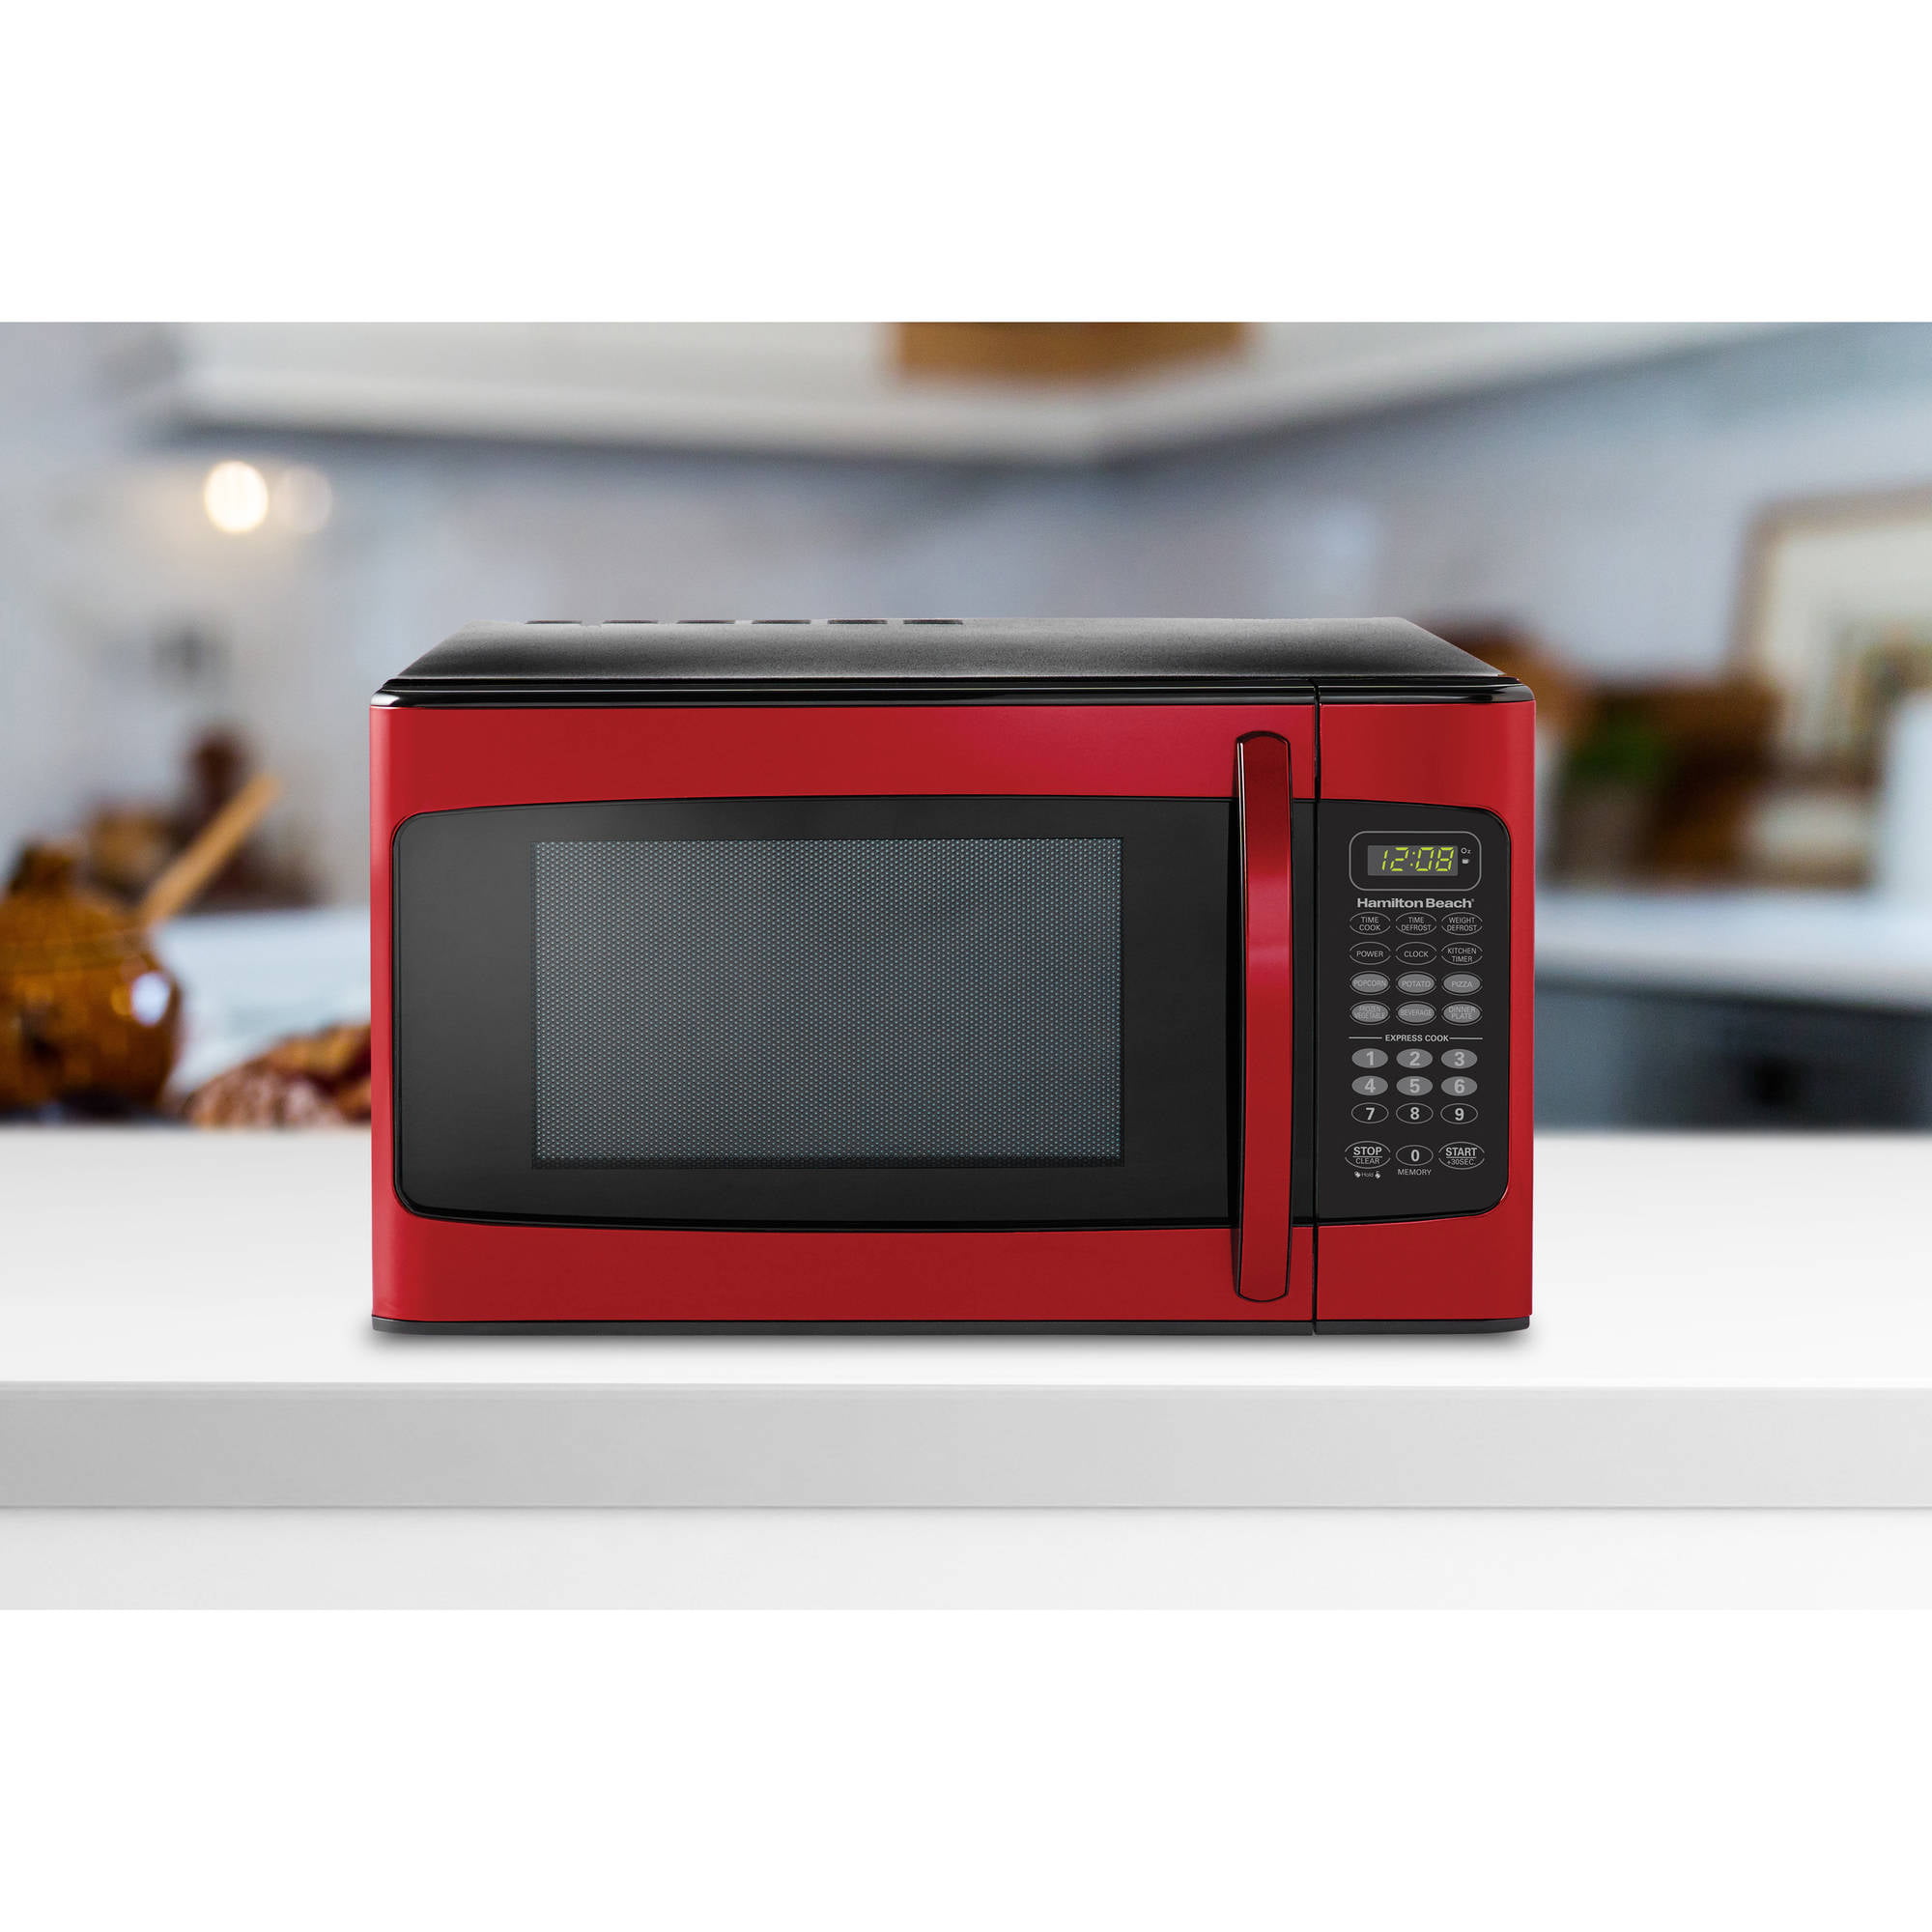 Hamilton Beach 1.1 cu FT Kitchen Microwave Oven 1000W LED Display Red